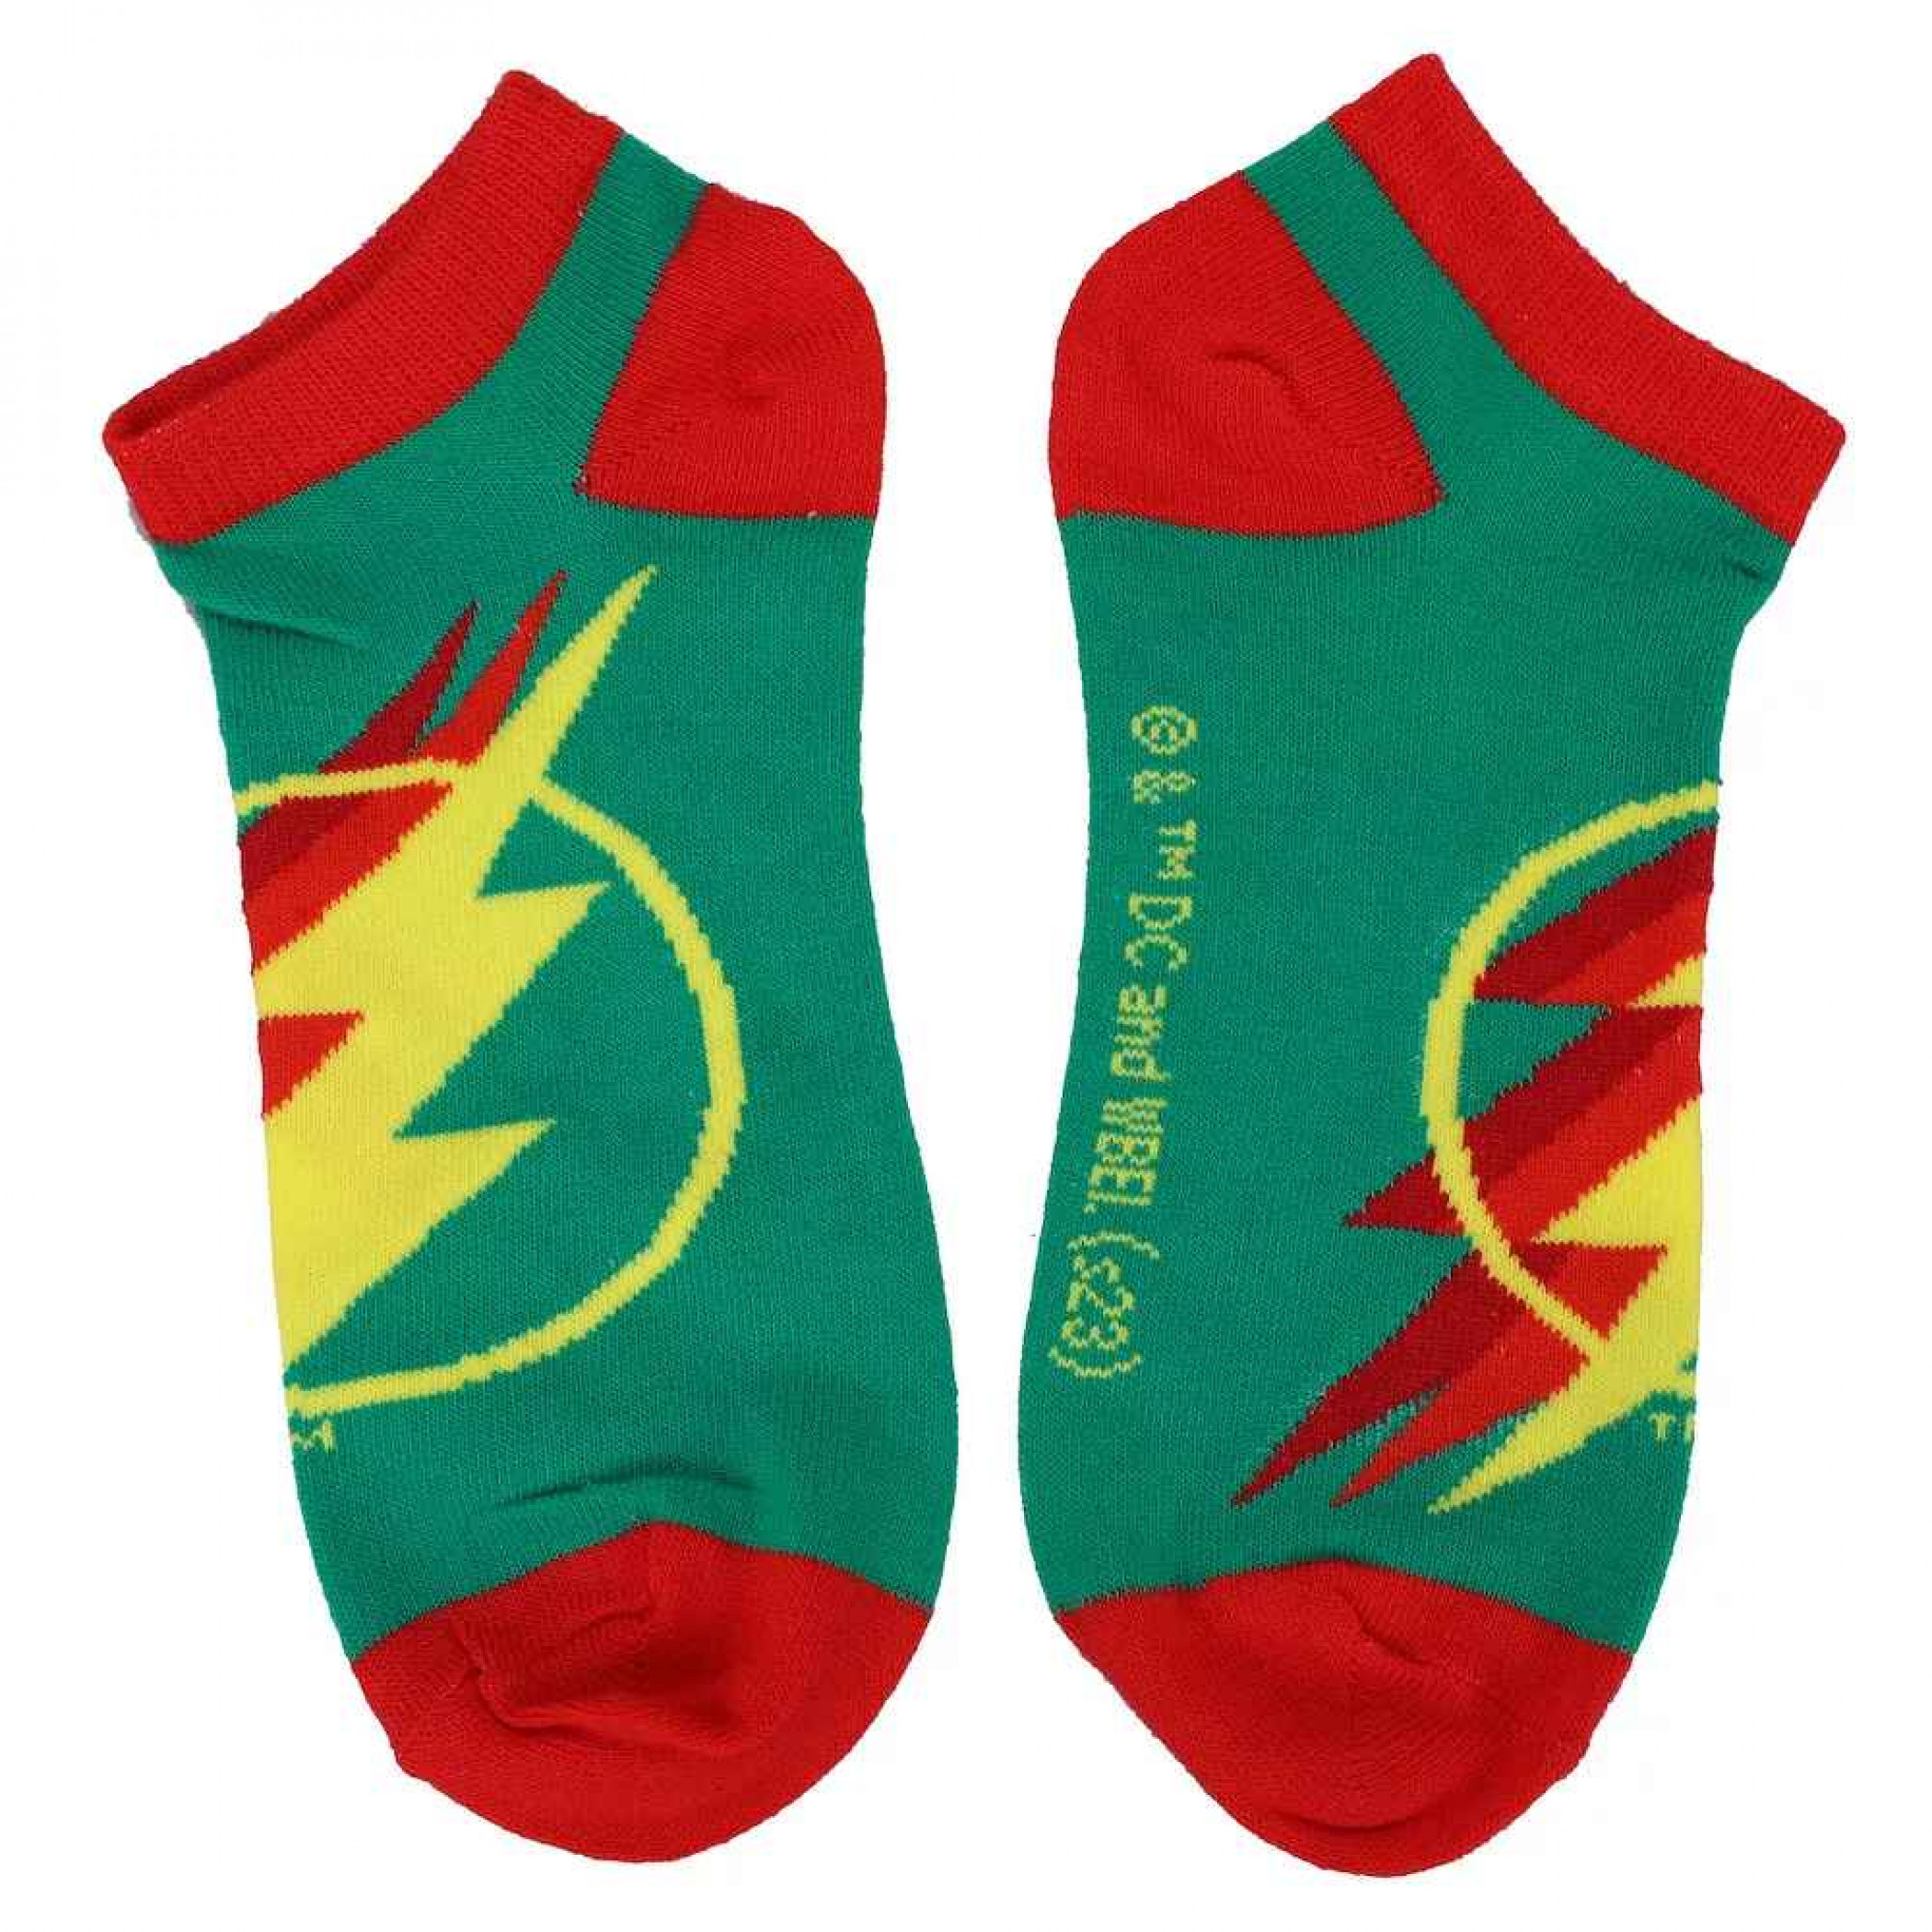 The Flash Worlds Collide 5-Pair Pack of Ankle Socks